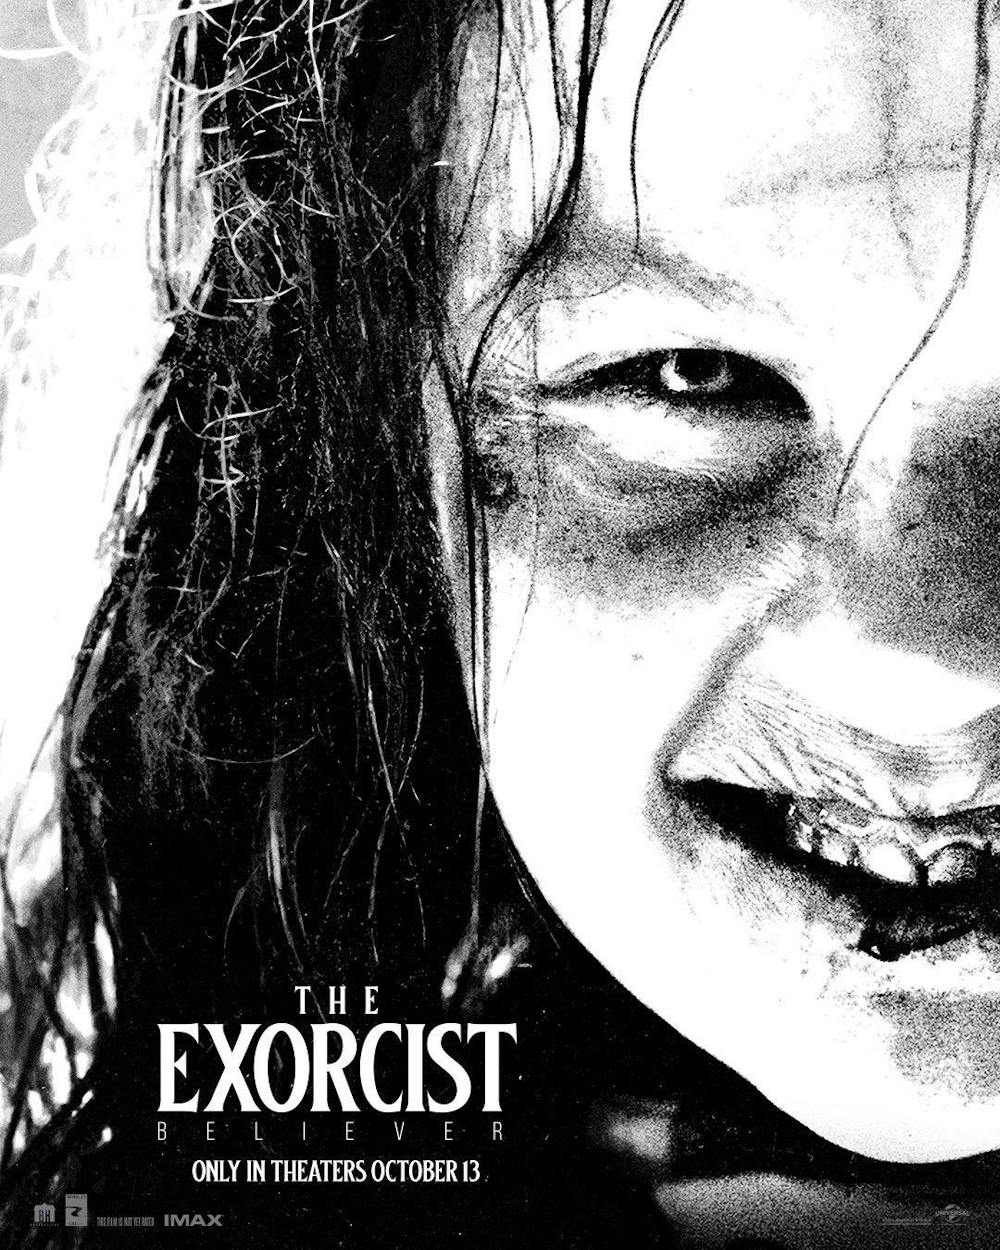 Review: "The Exorcist: Believer" lacks deeper sense of meaning